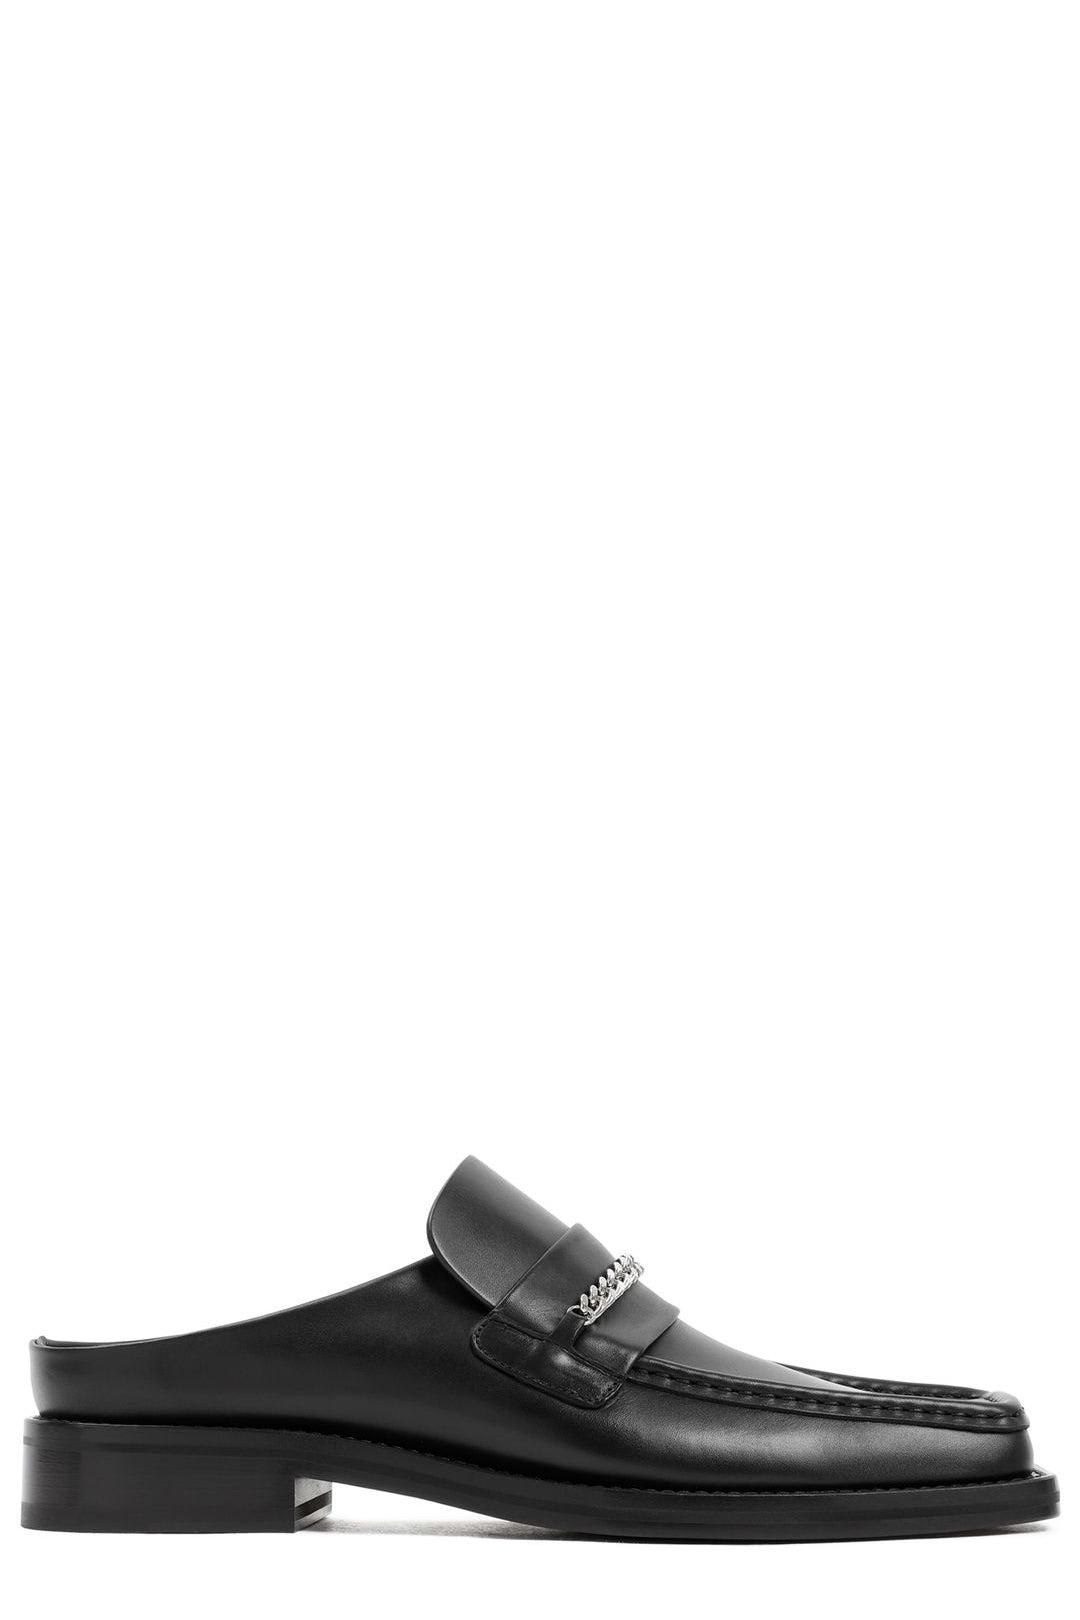 Martine Rose Chain Embellished Square Toe Loafers